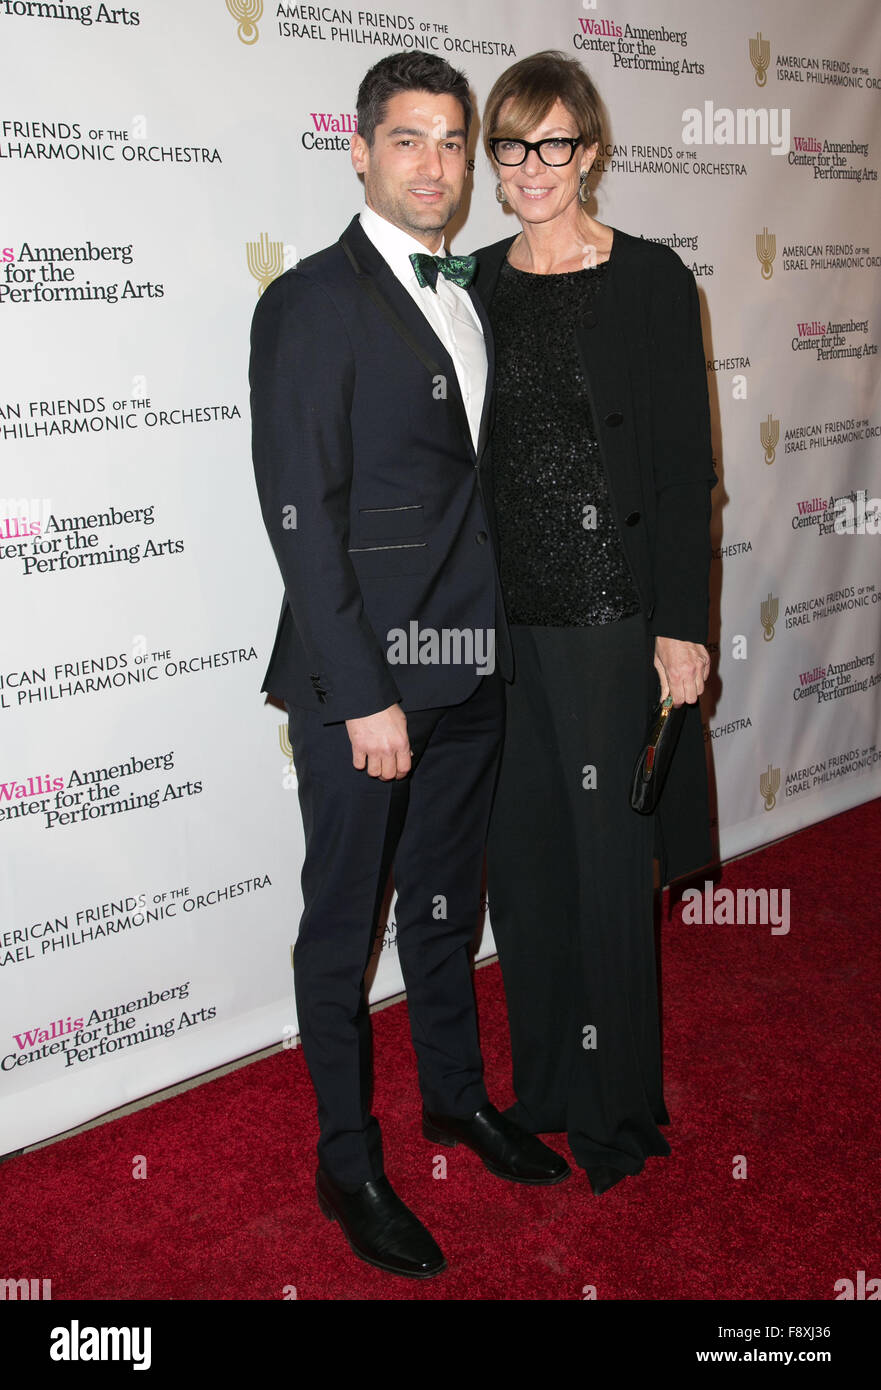 Celebrities attend The Wallis Annenberg Center for the Performing Arts and the American Friends of the Israel Philharmonic Orchestra’s “Duet Gala” at Wallis Annenberg Center for the Performing Arts in Beverly Hills.  Featuring: Phillip Joncas, Allison Jan Stock Photo